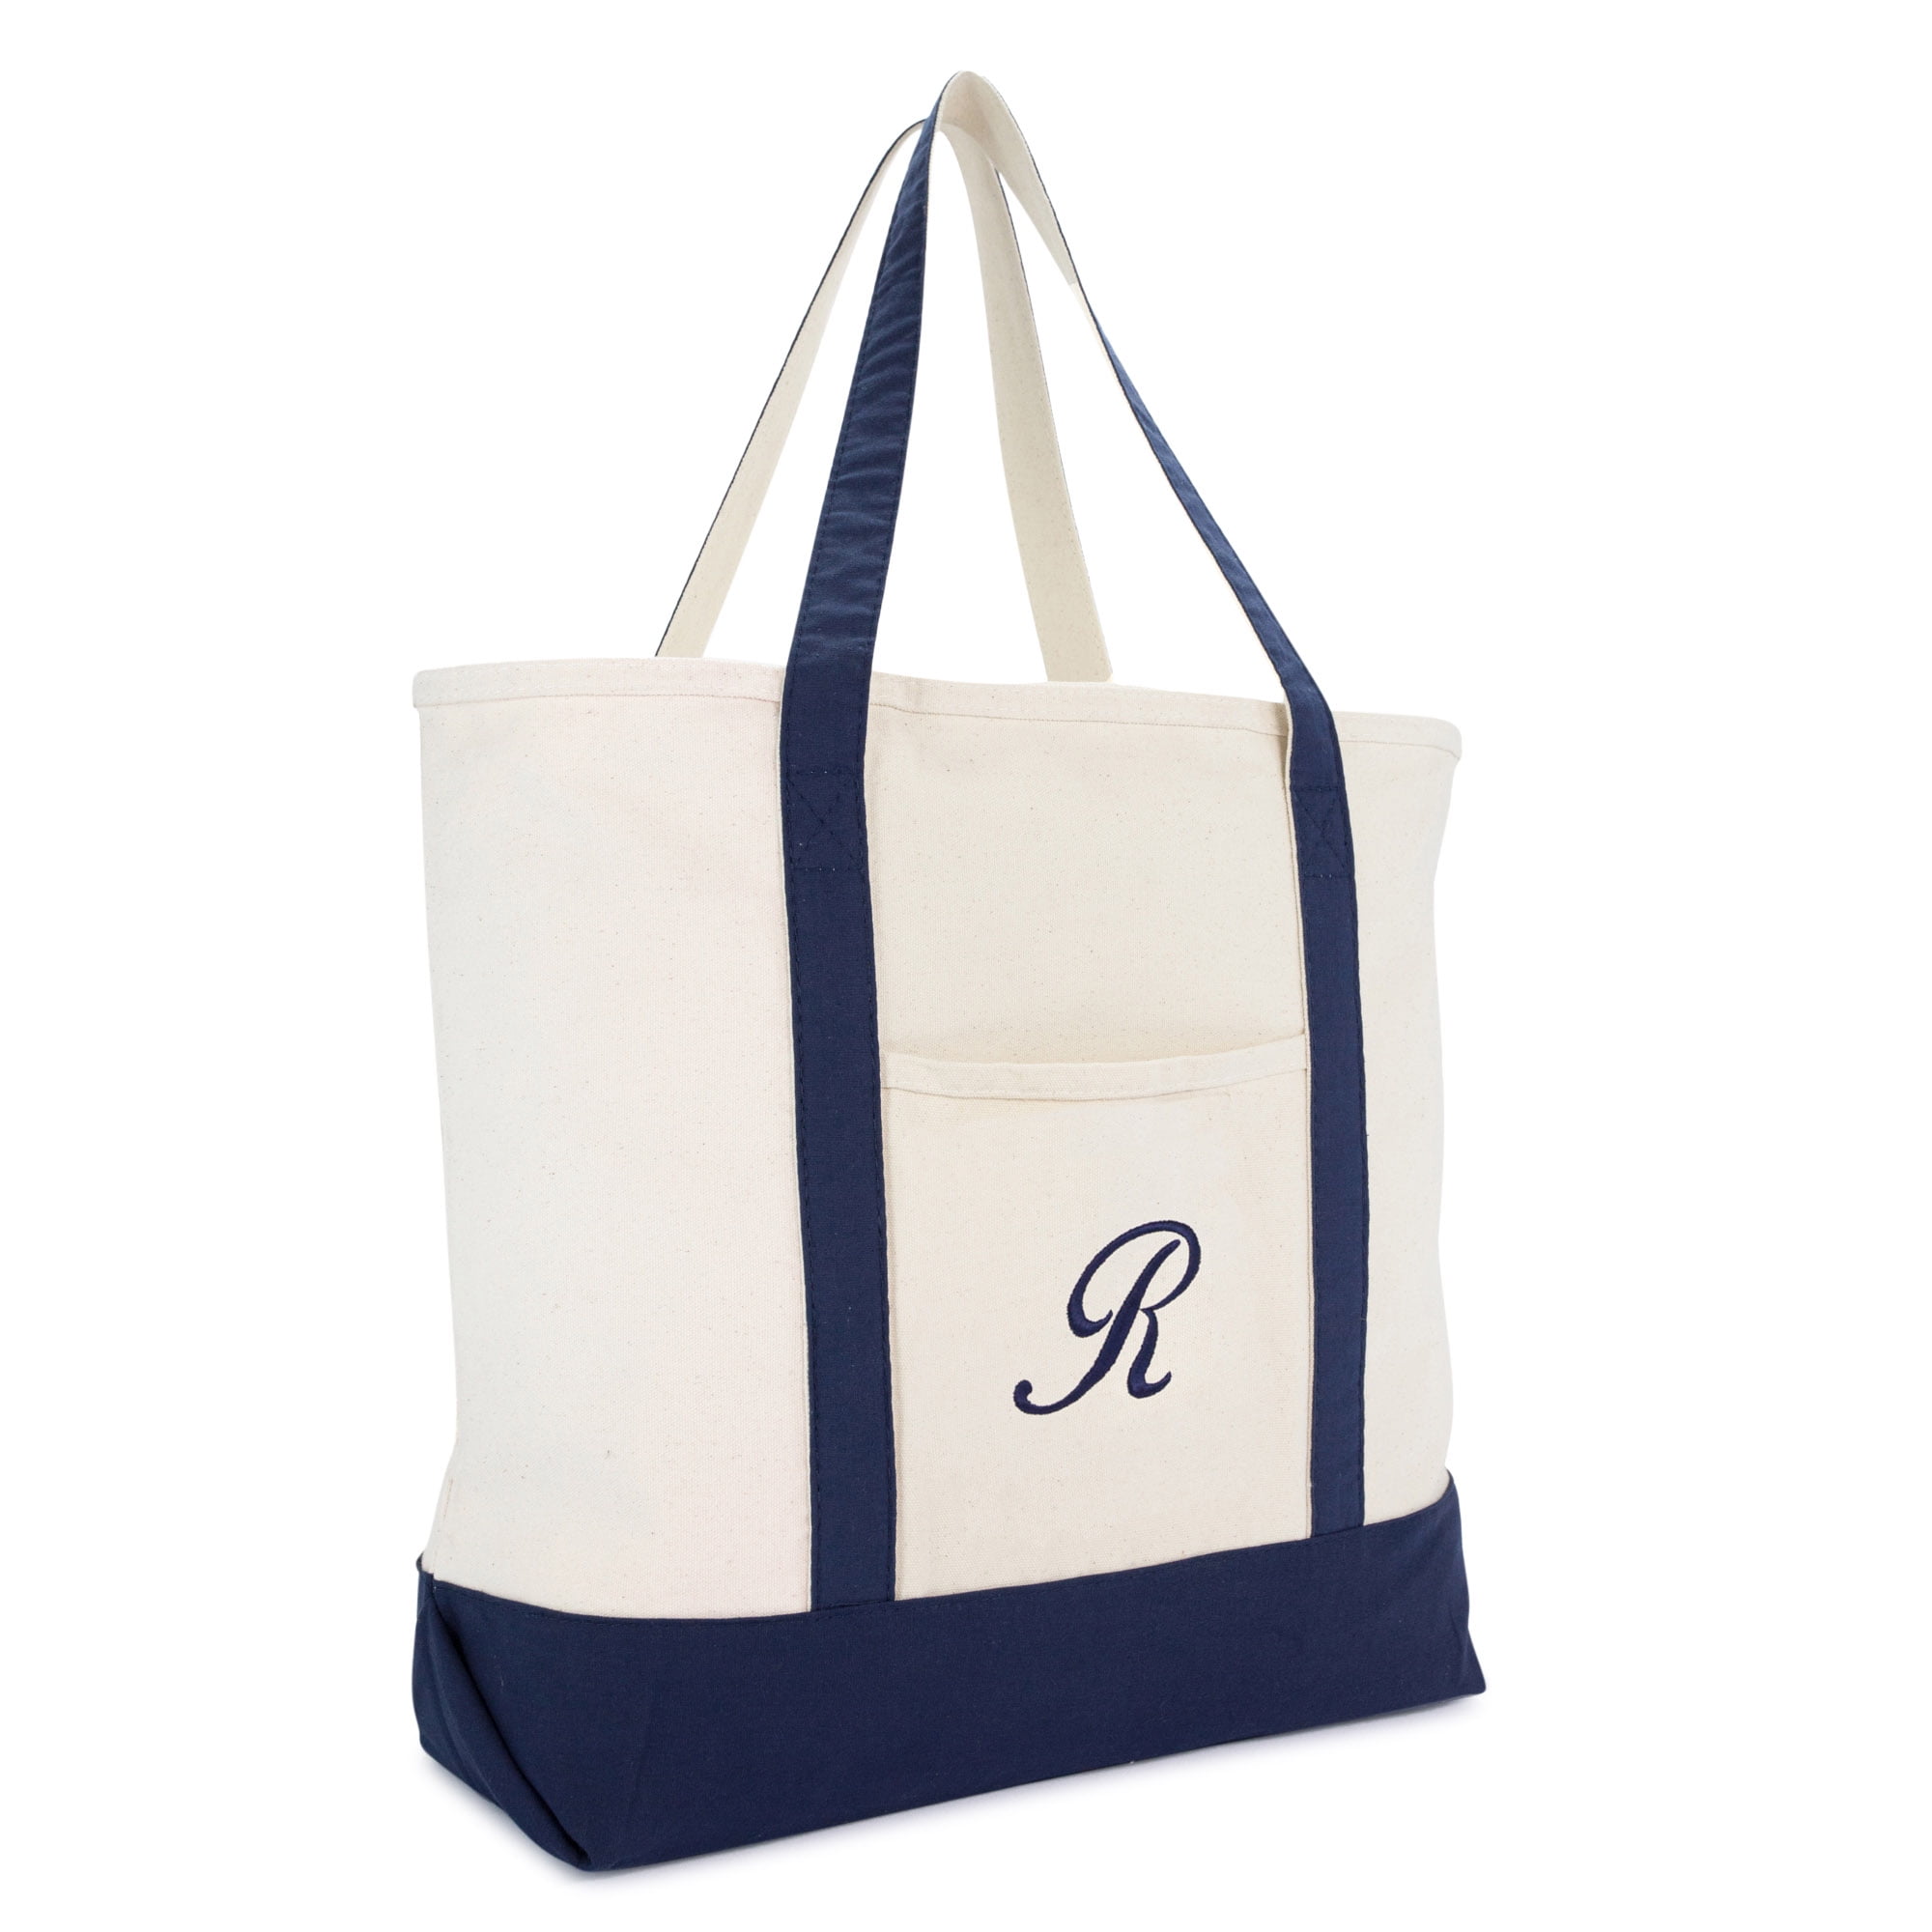 DALIX 22 Canvas Personalized Tote Bag Navy Blue - Q 